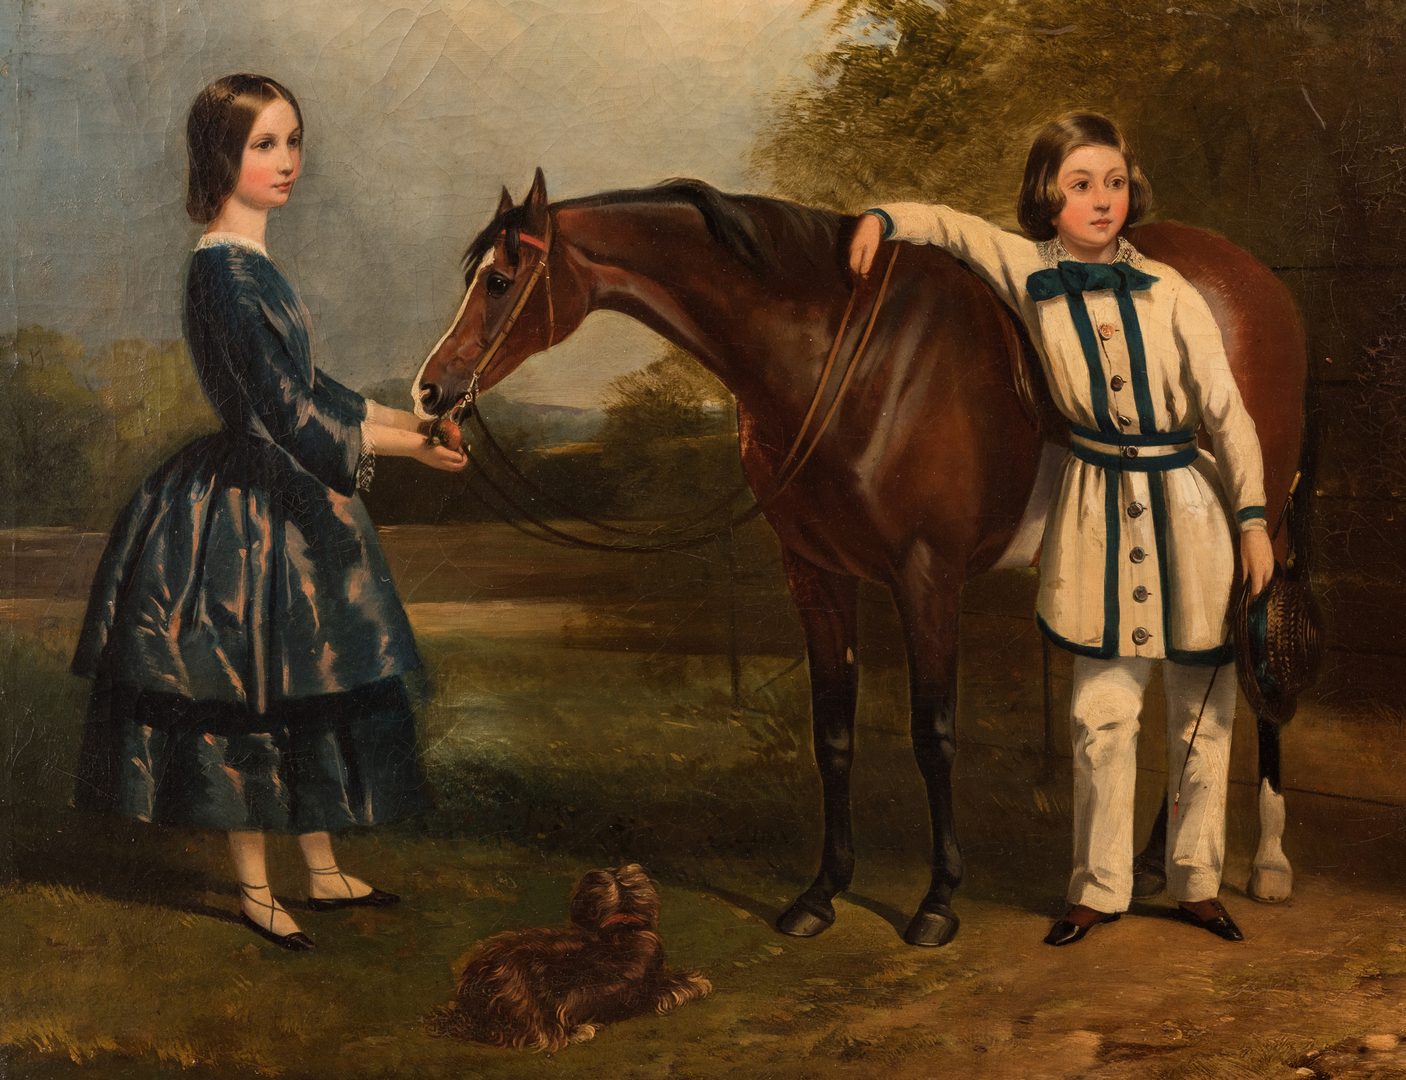 Lot 105: Portrait of a Family with Dog and Pony, circa 1845